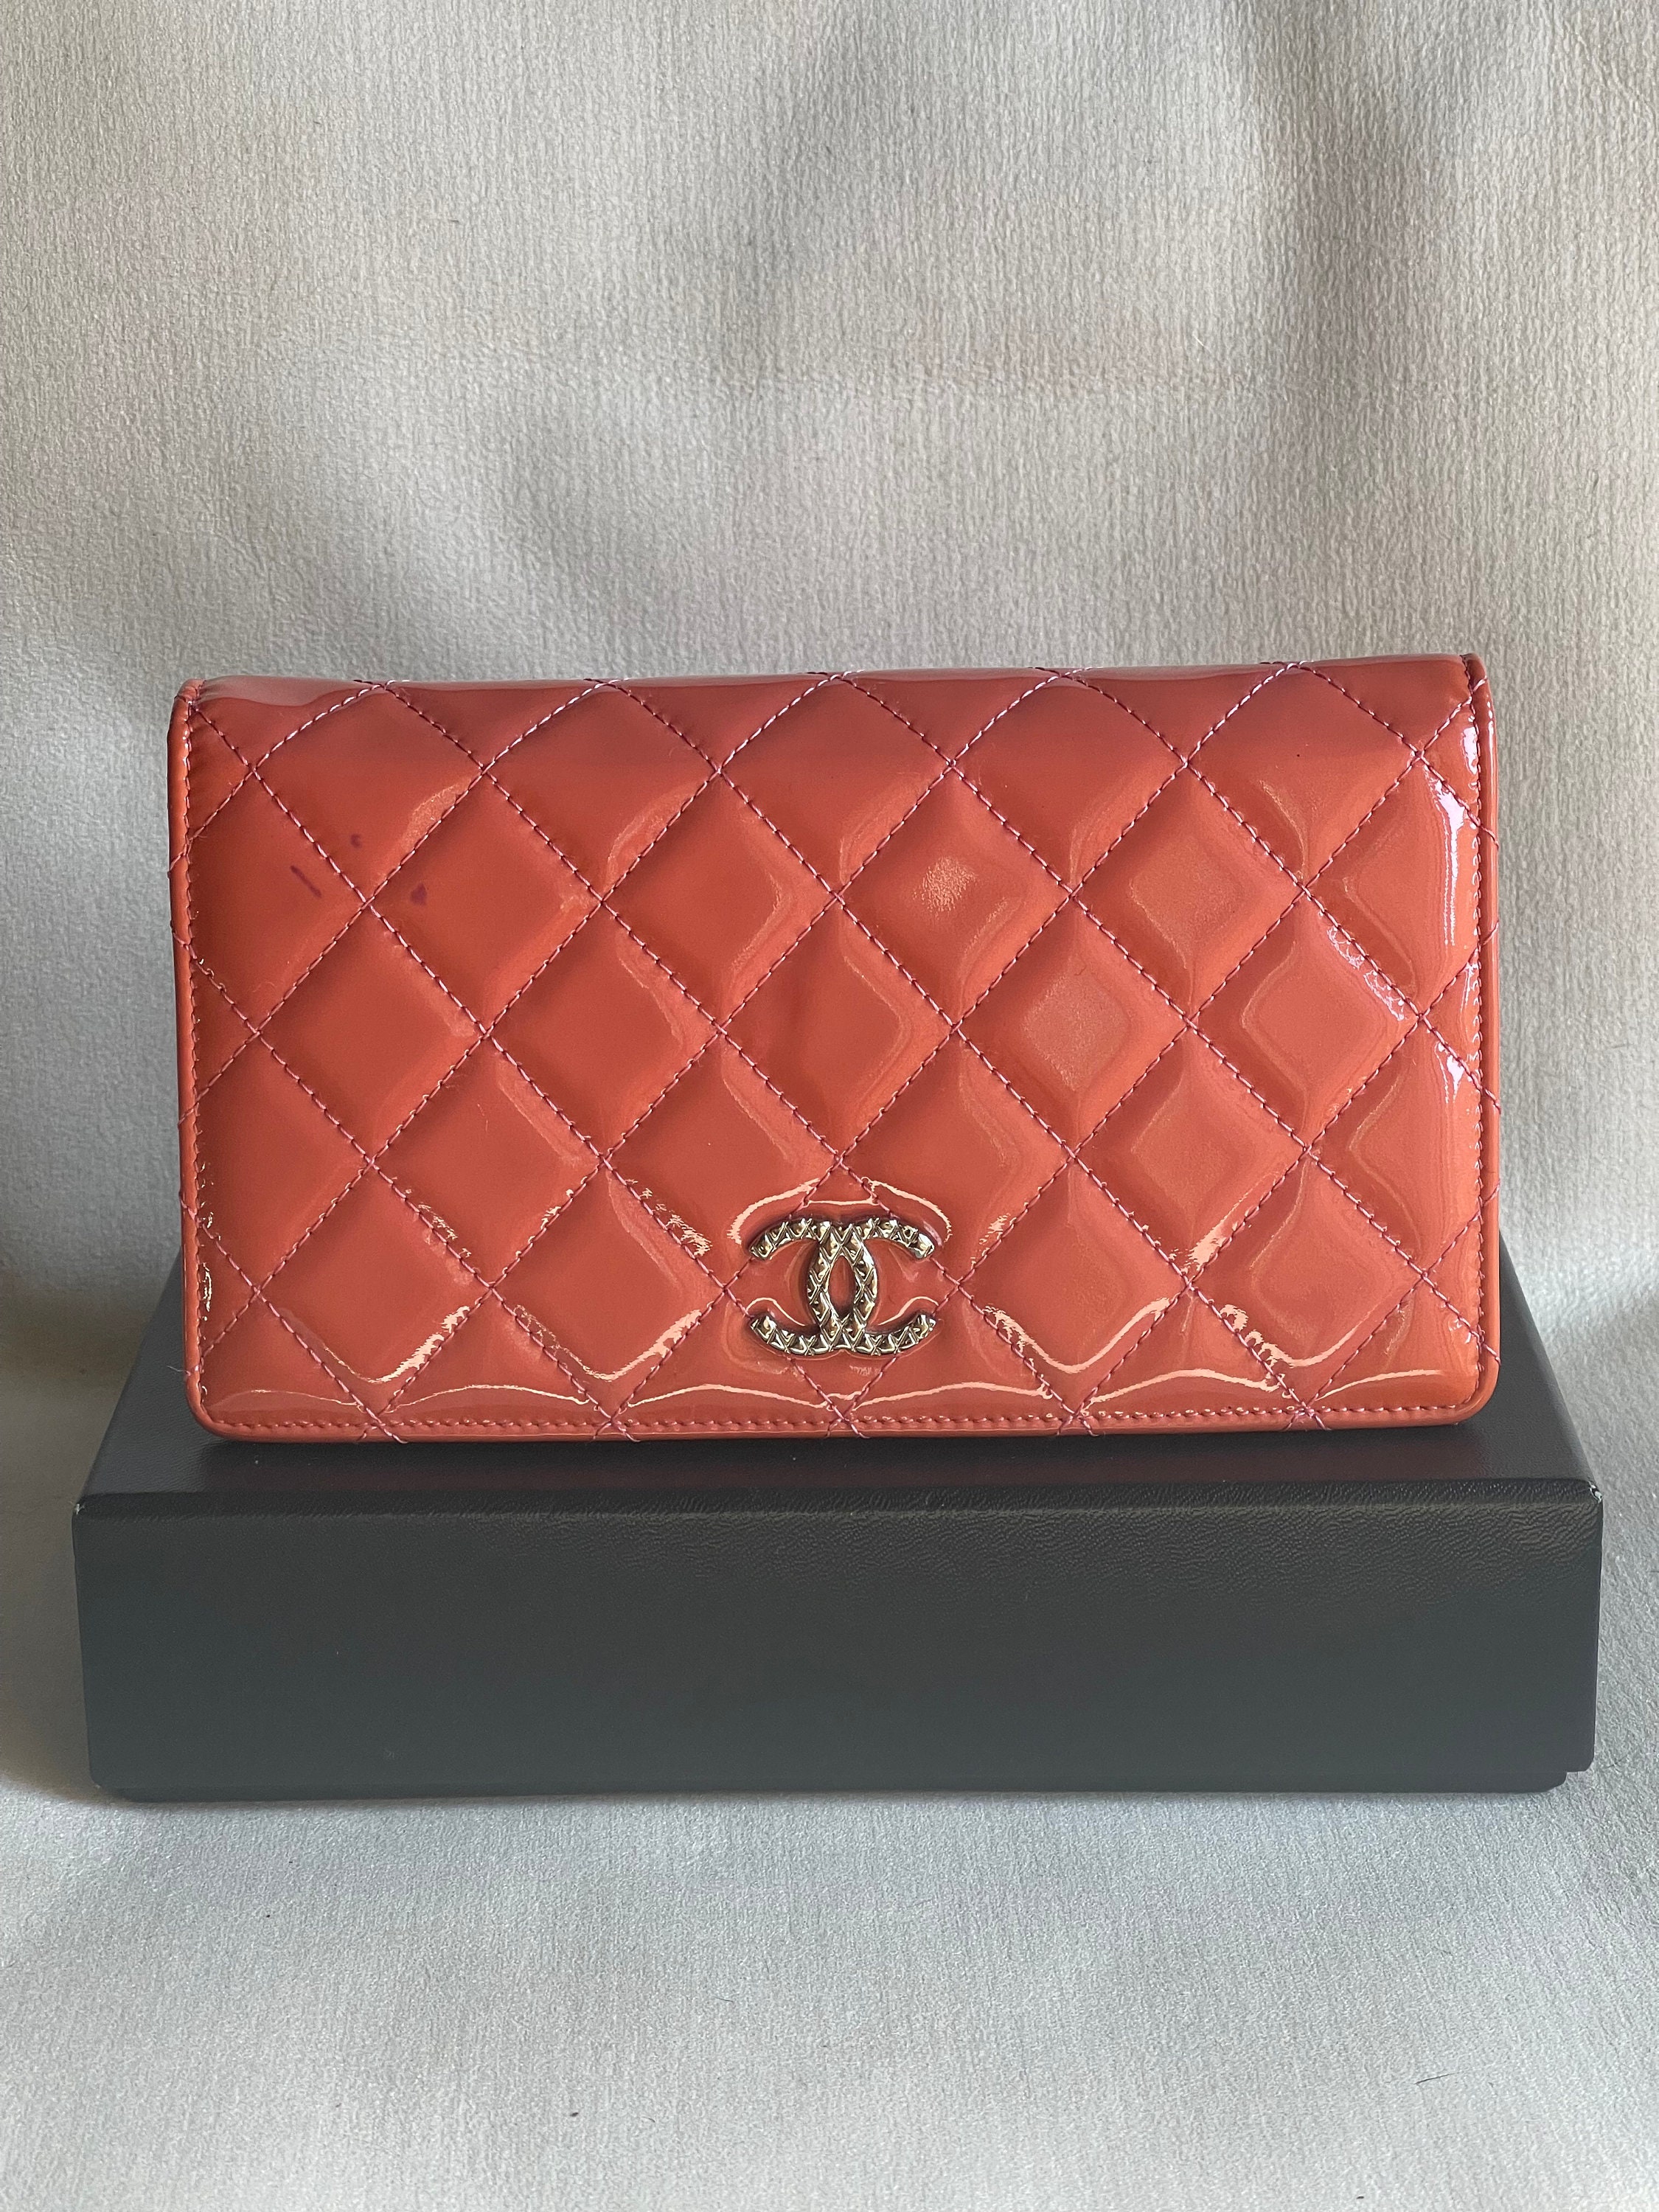 CHANEL Card Holder ID Wallet Metallic Gunmetal Quilted Leather